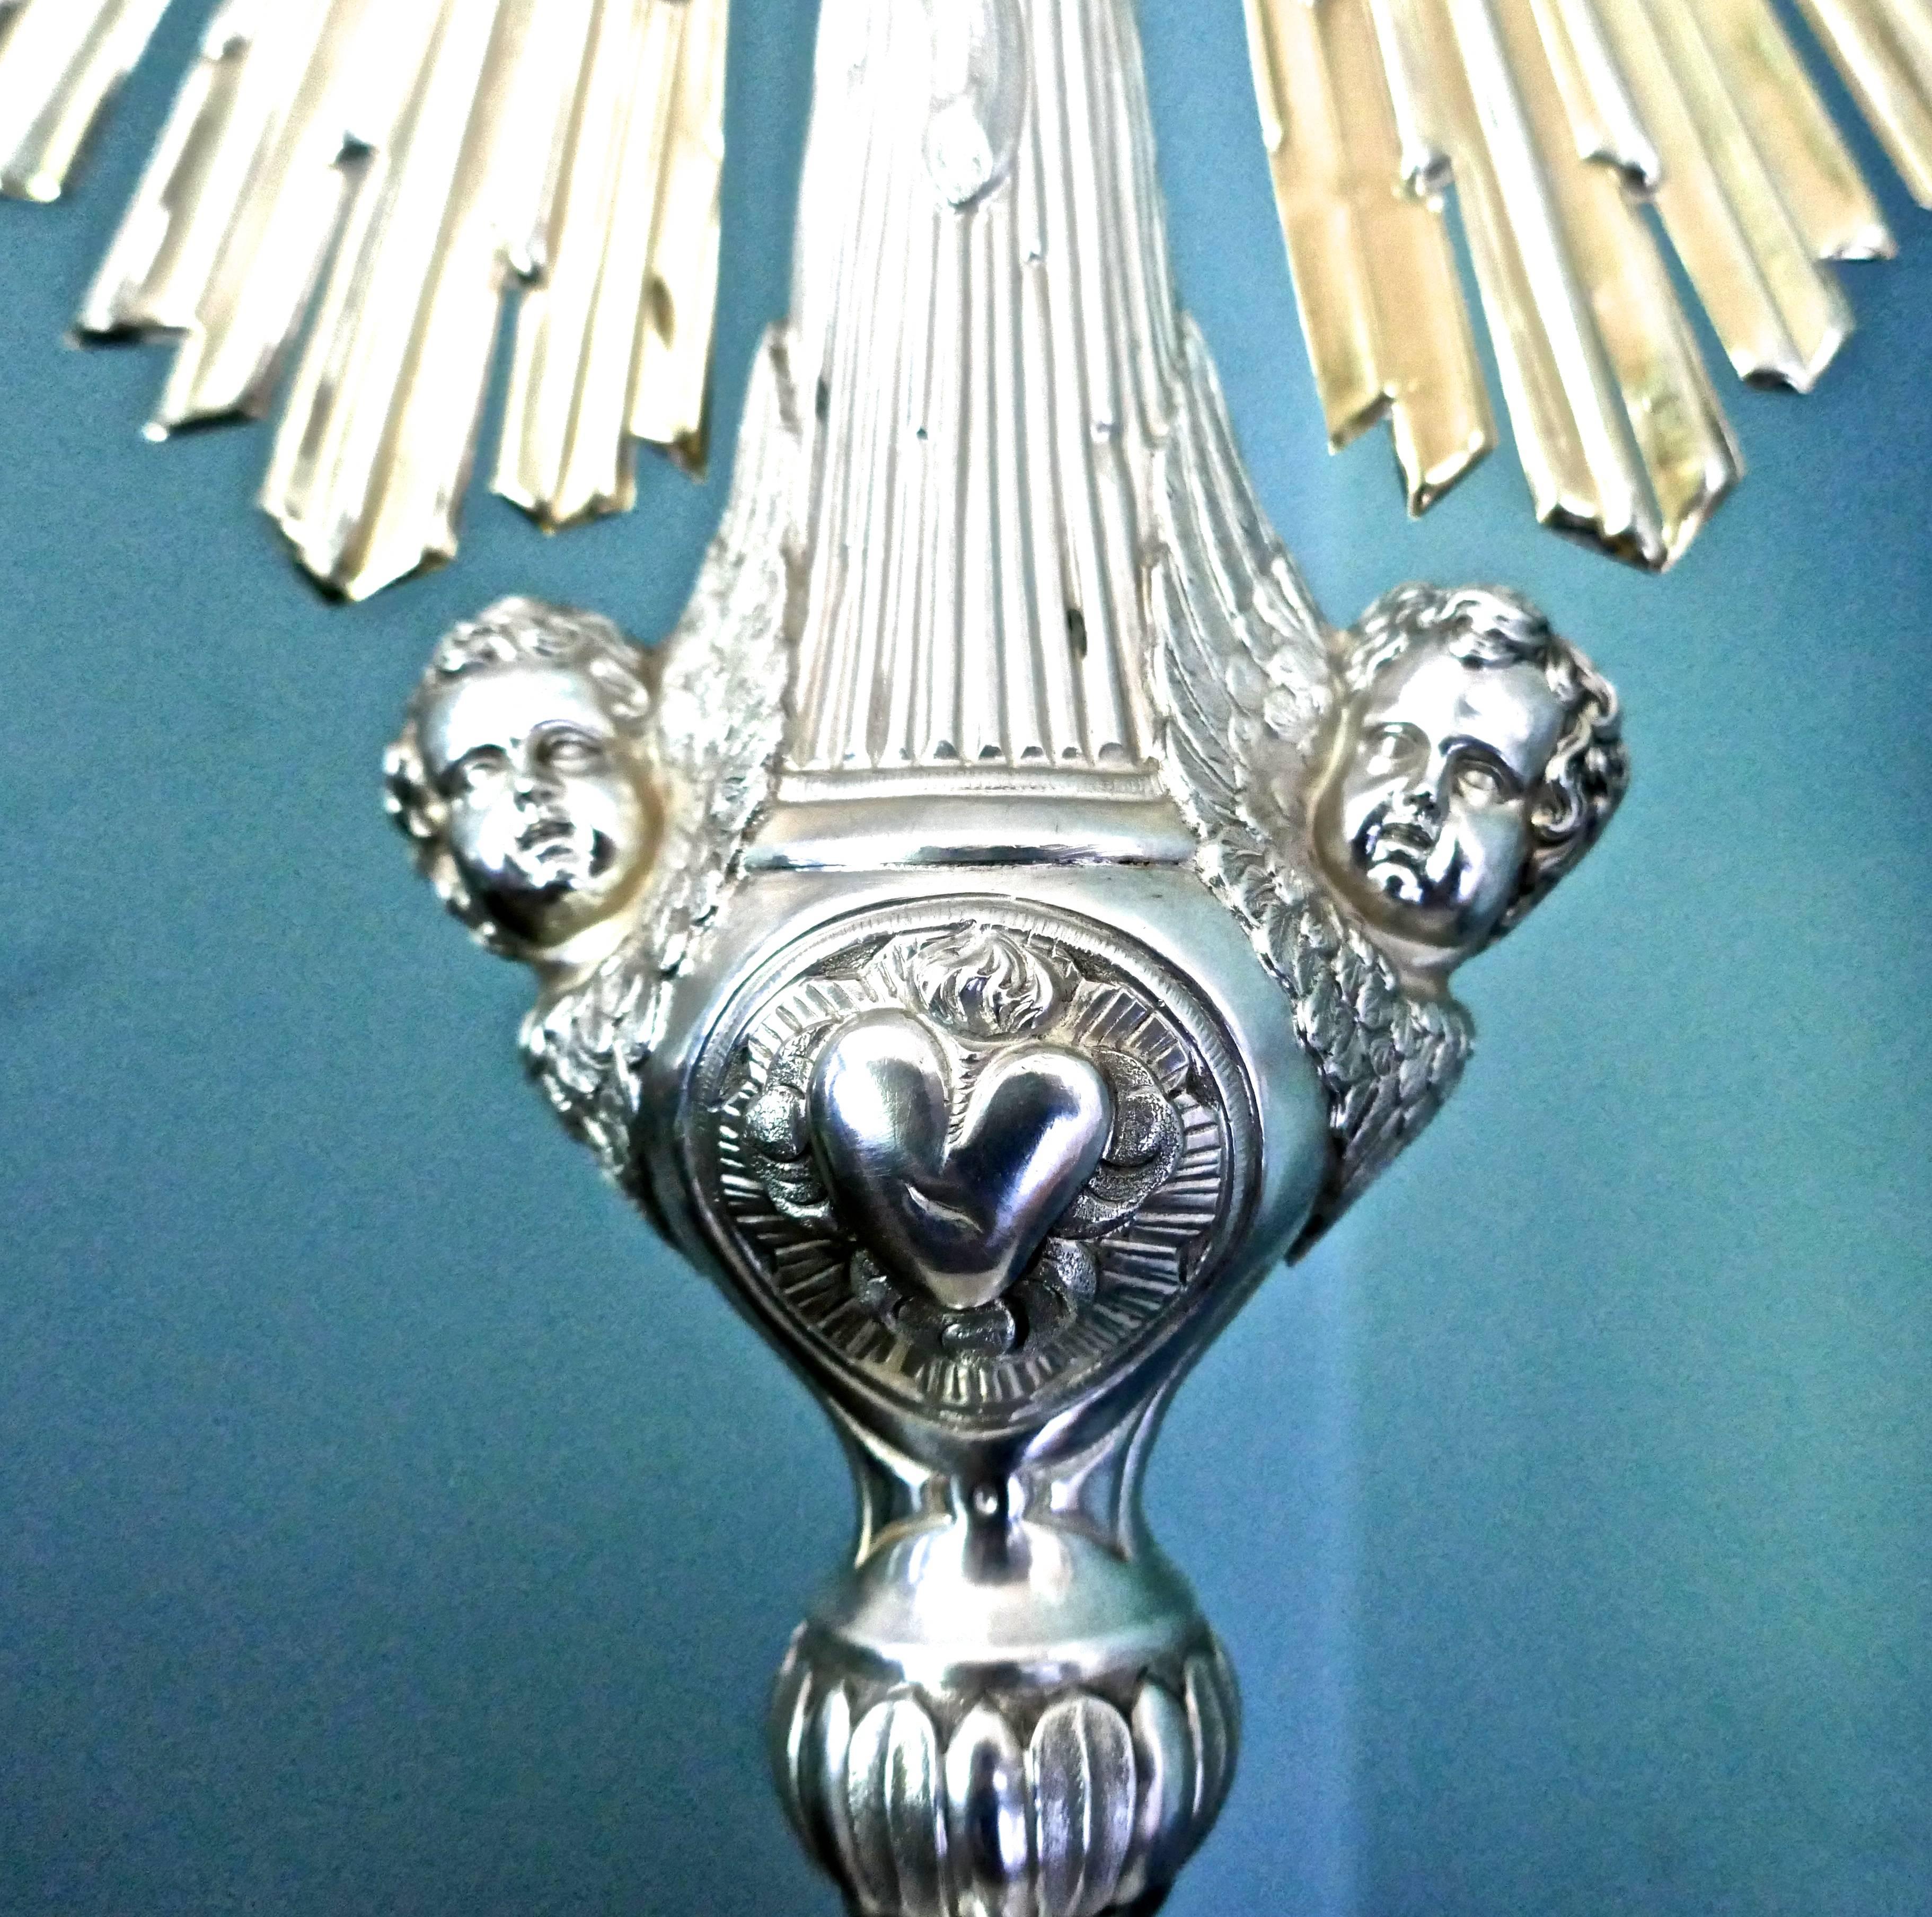 19th Century French Sterling Silver and Vermeli Monstrance Decorated with Cherubs